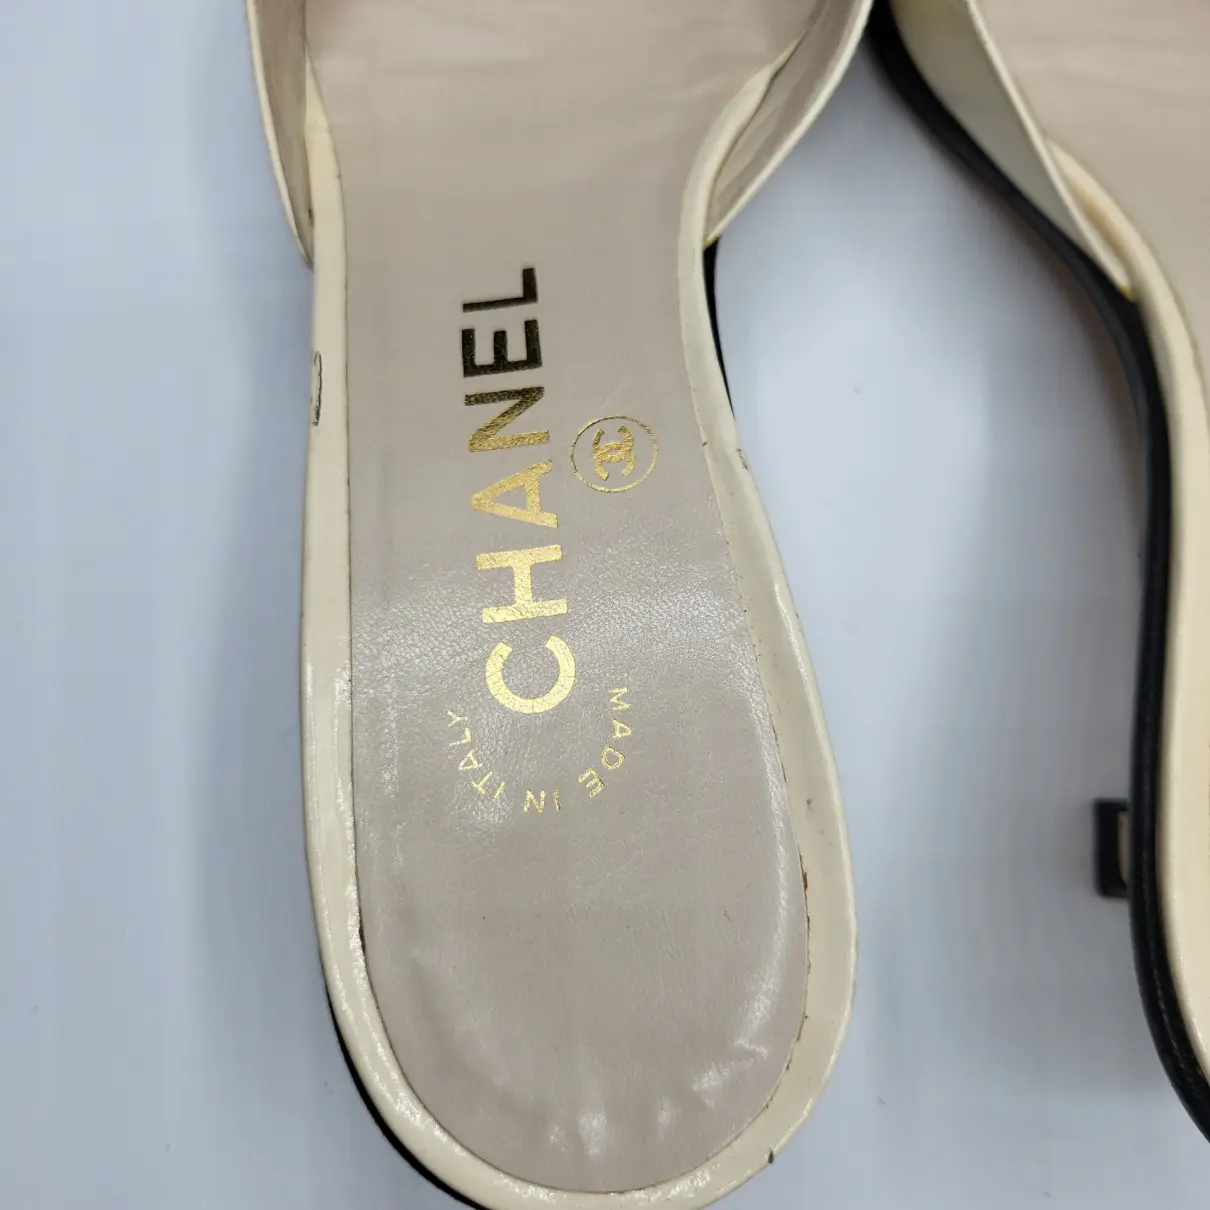 Patent leather mules Chanel